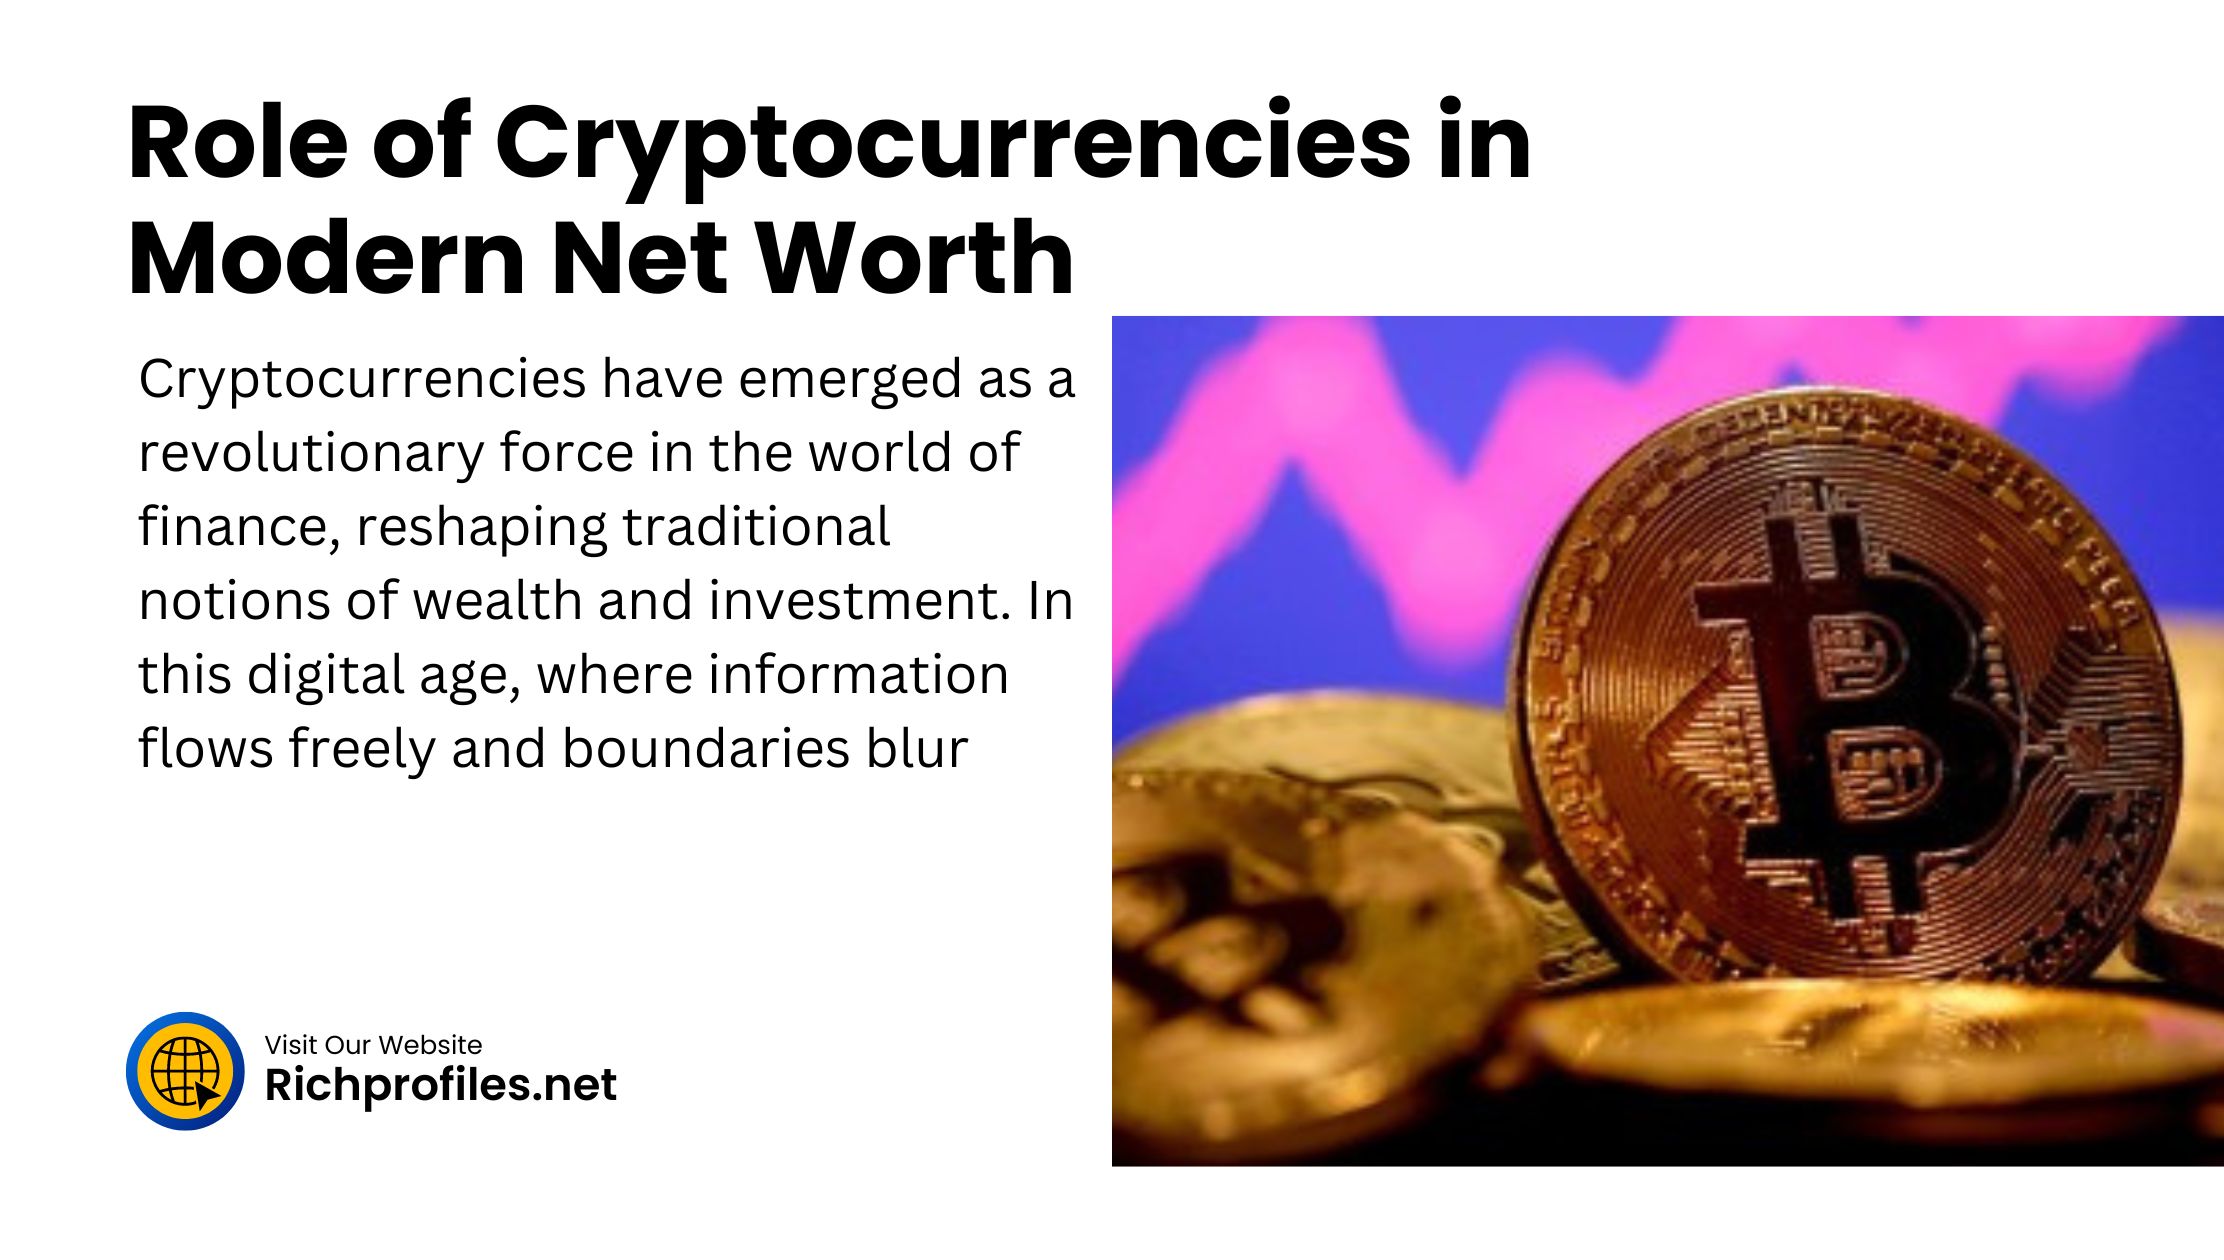 Role of Cryptocurrencies in Modern Net Worth